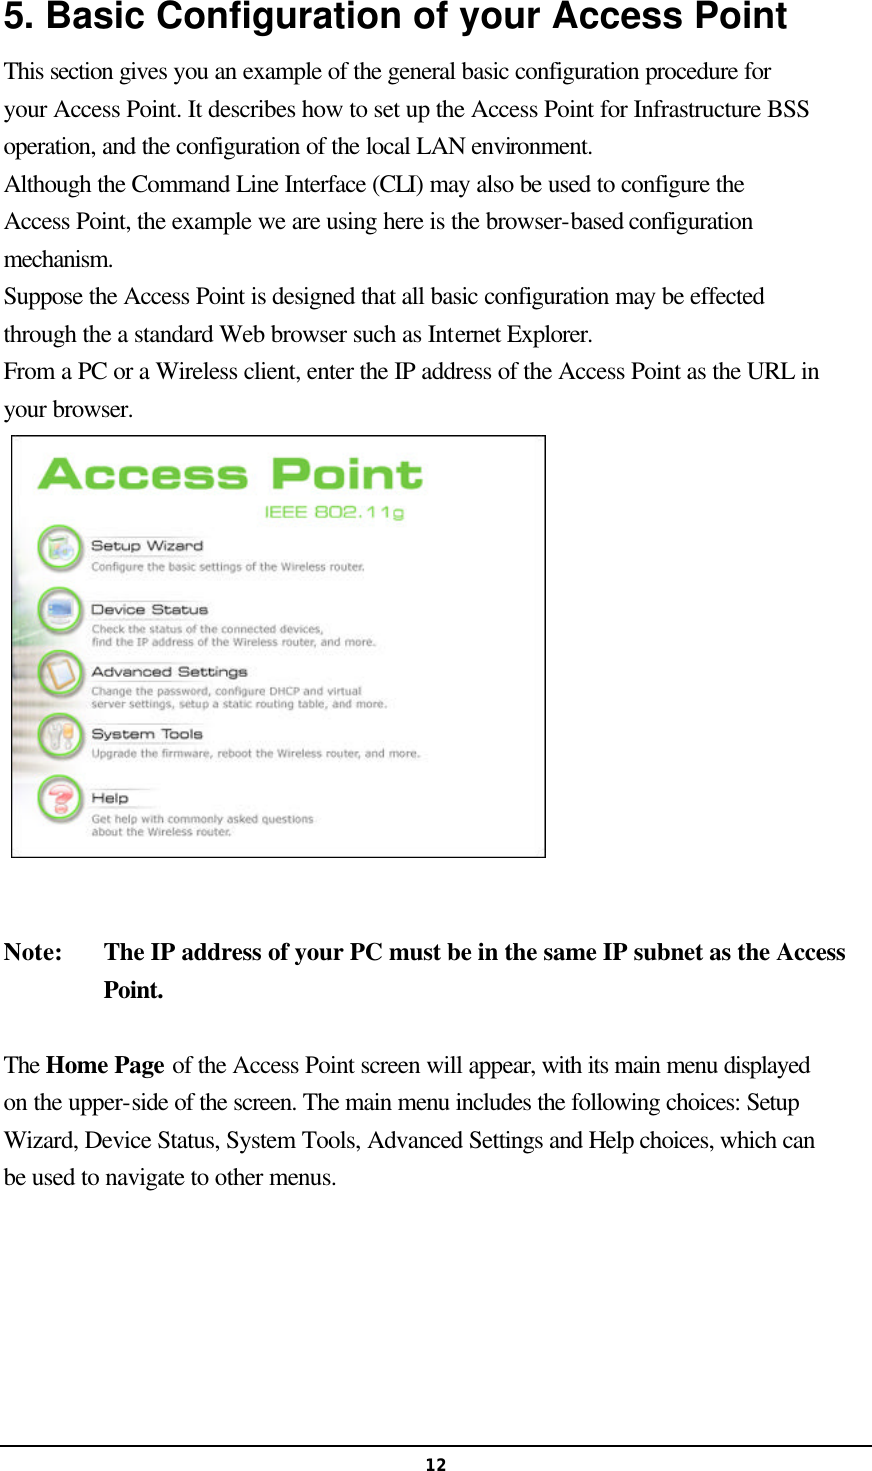  125. Basic Configuration of your Access Point This section gives you an example of the general basic configuration procedure for your Access Point. It describes how to set up the Access Point for Infrastructure BSS operation, and the configuration of the local LAN environment. Although the Command Line Interface (CLI) may also be used to configure the Access Point, the example we are using here is the browser-based configuration mechanism.   Suppose the Access Point is designed that all basic configuration may be effected through the a standard Web browser such as Internet Explorer. From a PC or a Wireless client, enter the IP address of the Access Point as the URL in your browser.   Note:   The IP address of your PC must be in the same IP subnet as the Access Point.    The Home Page of the Access Point screen will appear, with its main menu displayed on the upper-side of the screen. The main menu includes the following choices: Setup Wizard, Device Status, System Tools, Advanced Settings and Help choices, which can be used to navigate to other menus.   